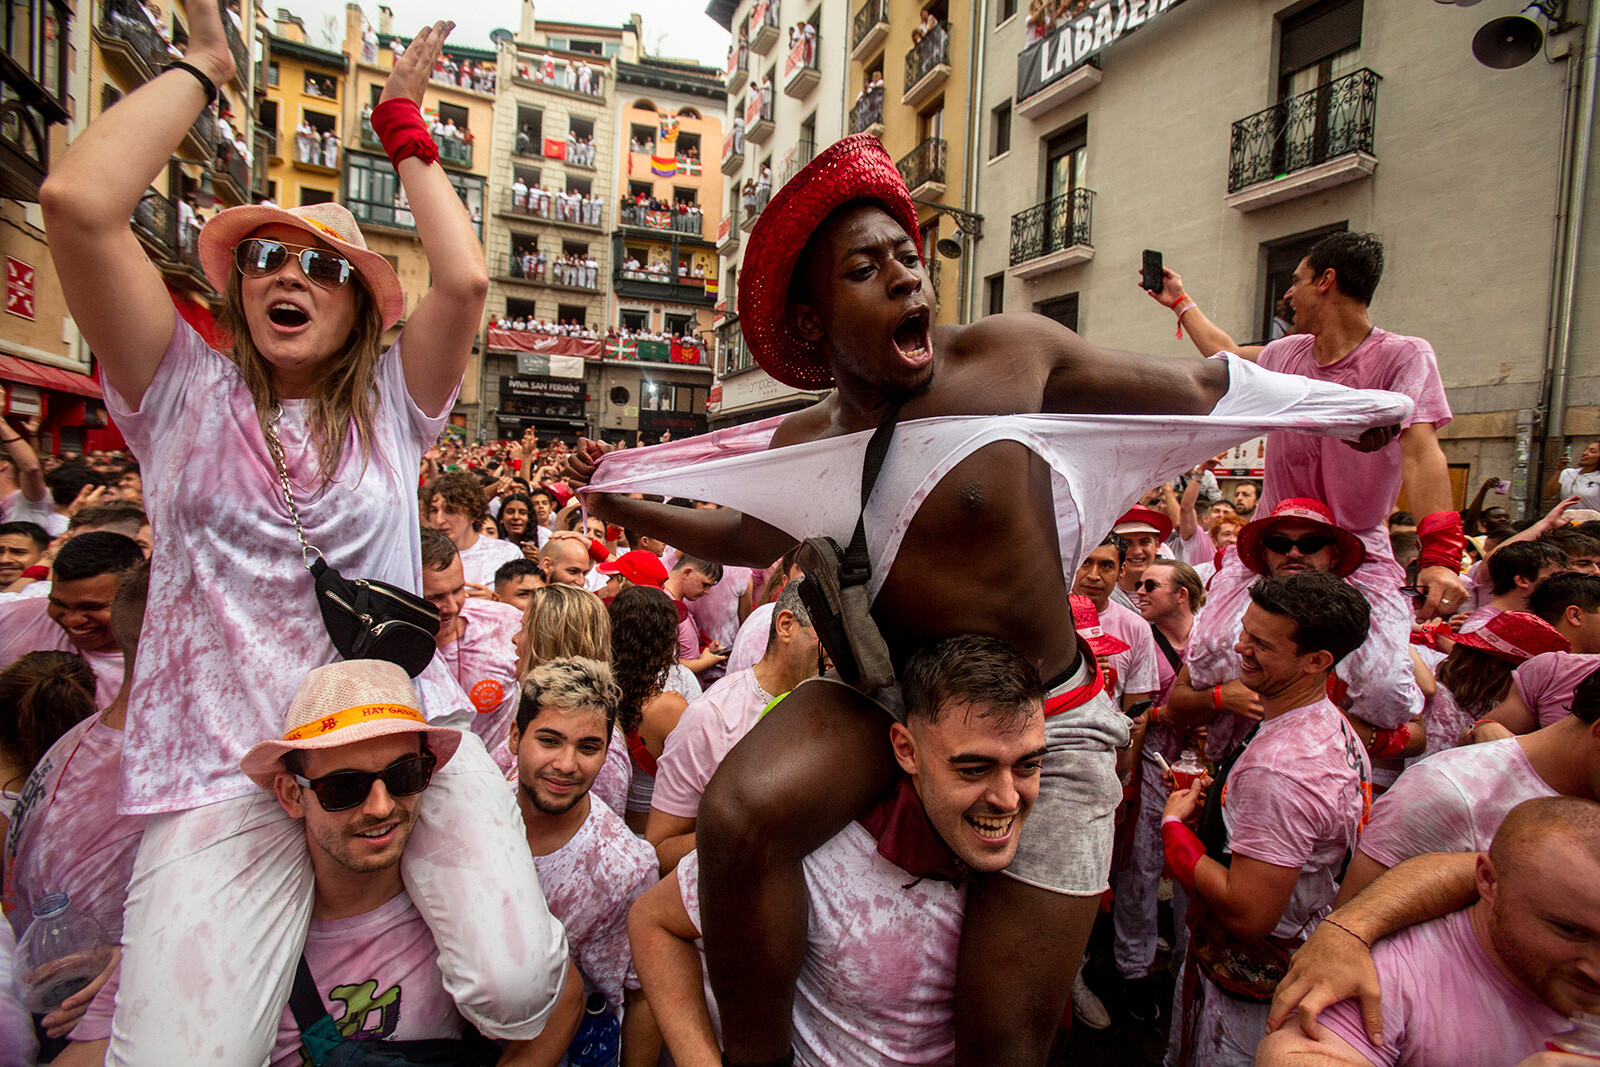 Pablo Blazquez Dominguez/Getty ImagesThousands have taken to the streets for Pamplona